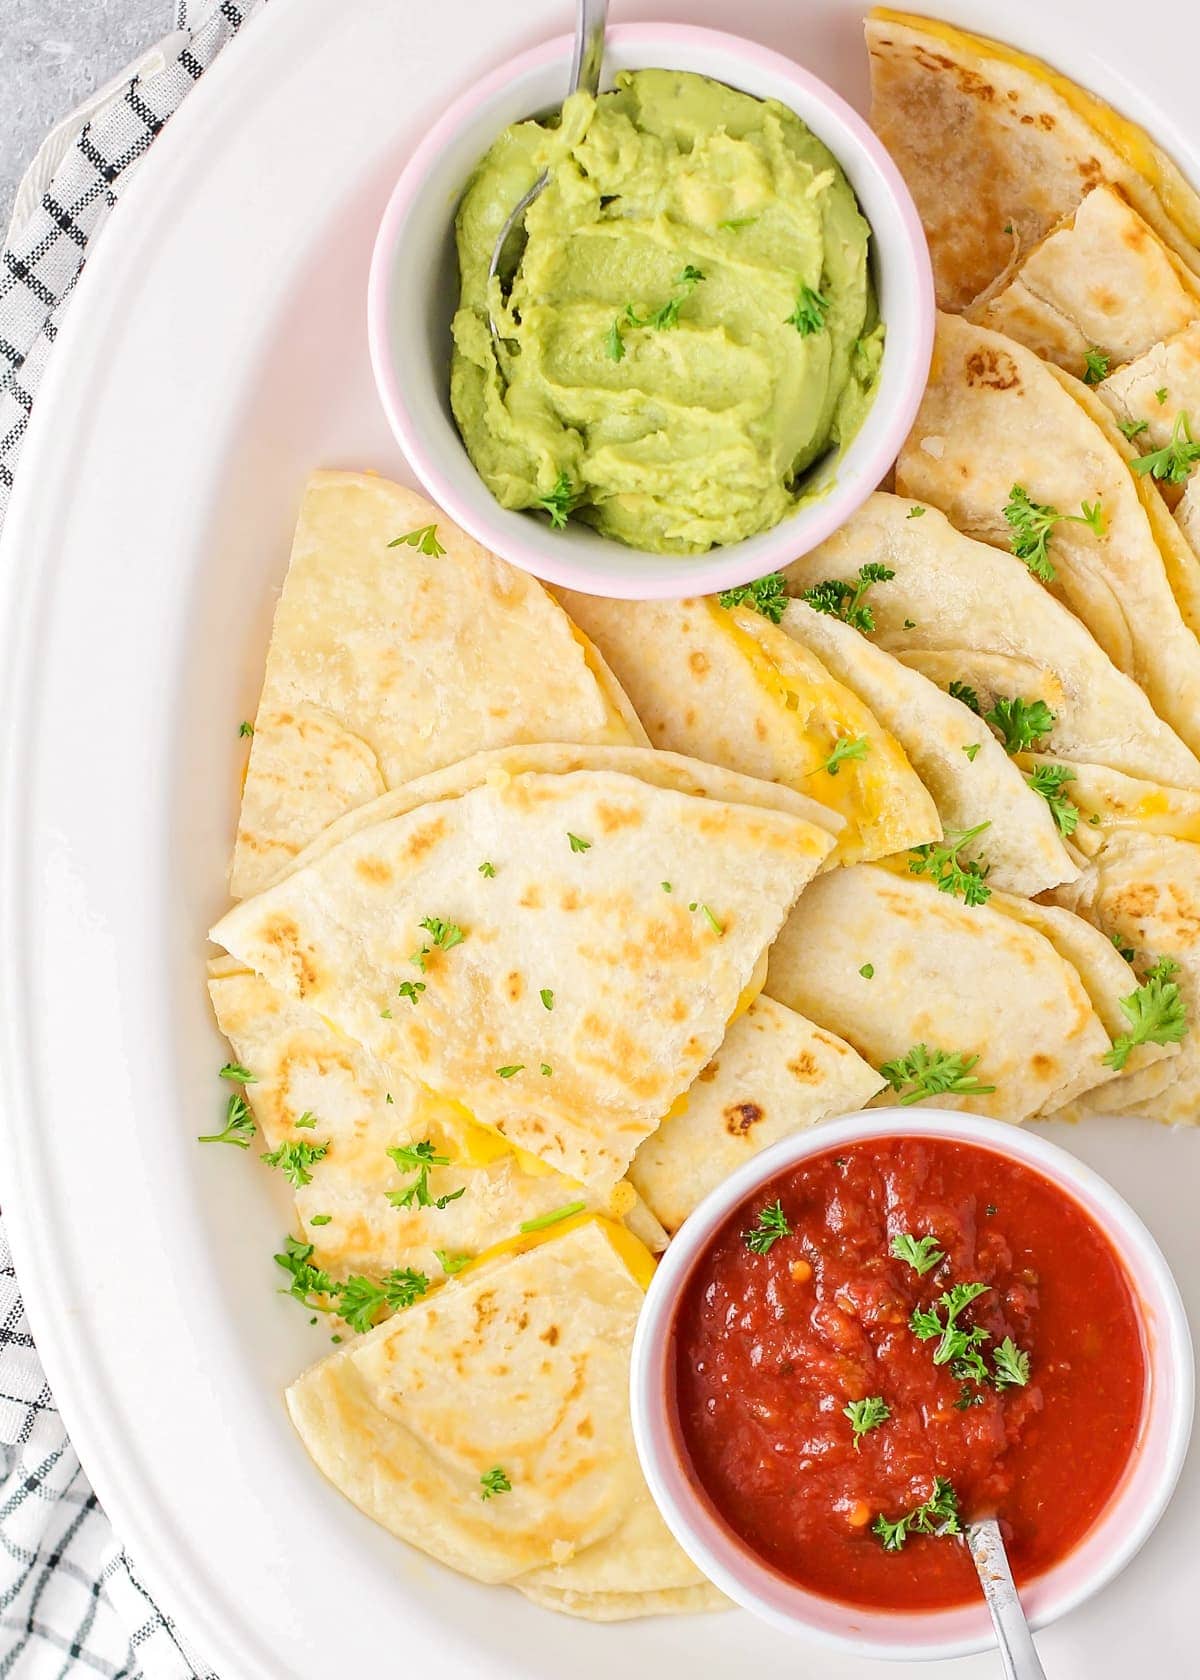 A platter filled with cheese quesadilla, salsa, and guacamole.